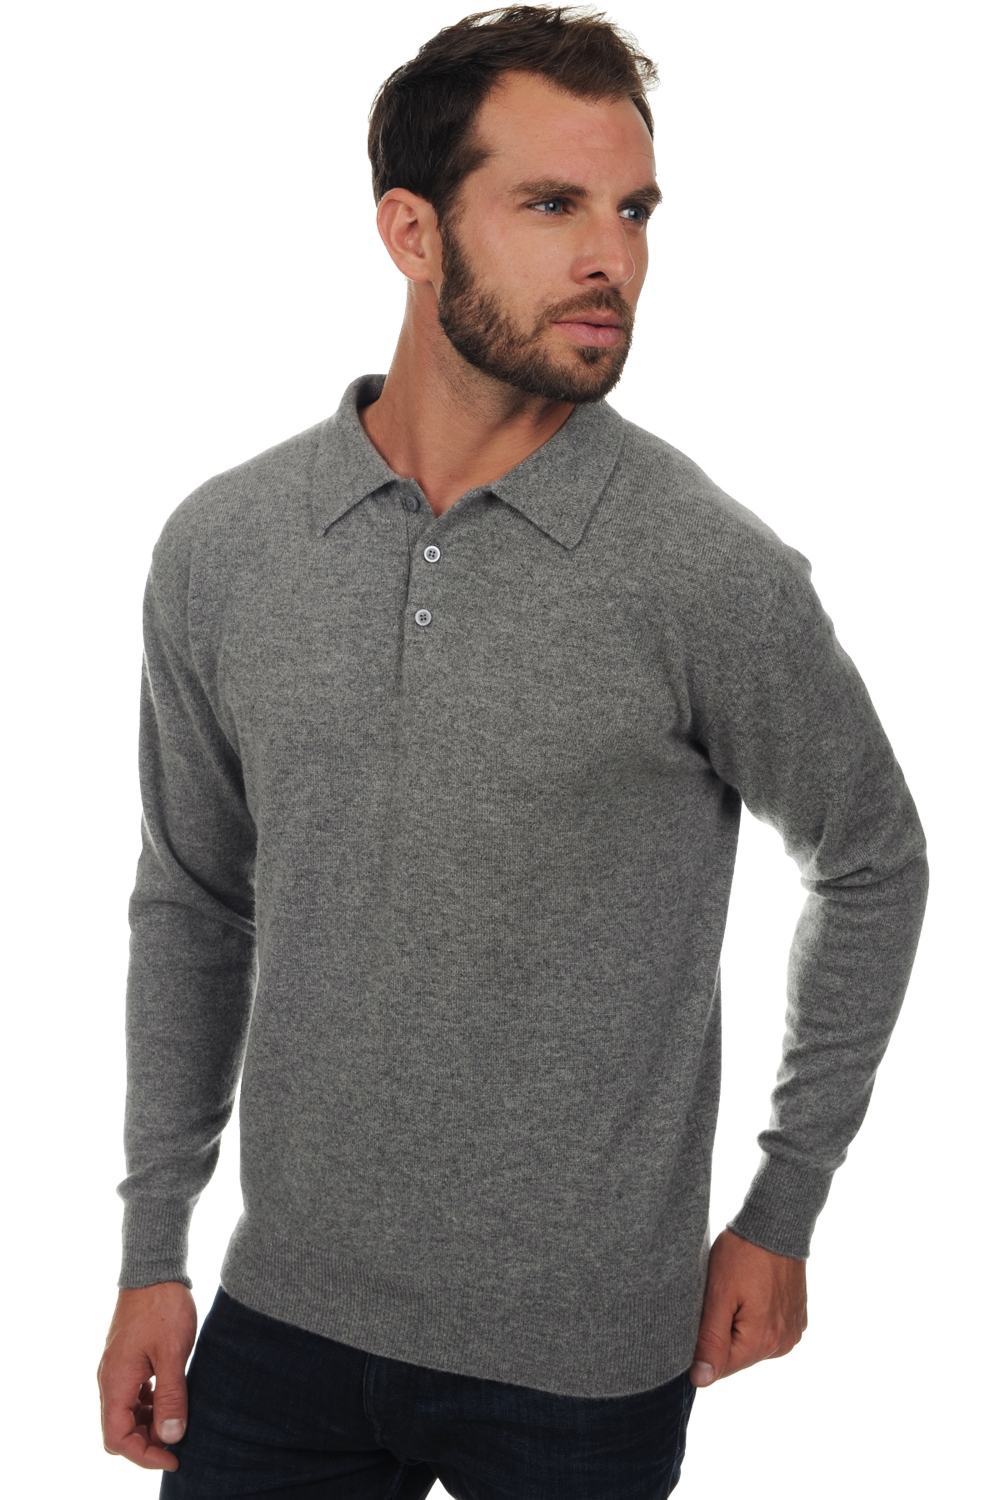 Cachemire pull homme alexandre gris chine s